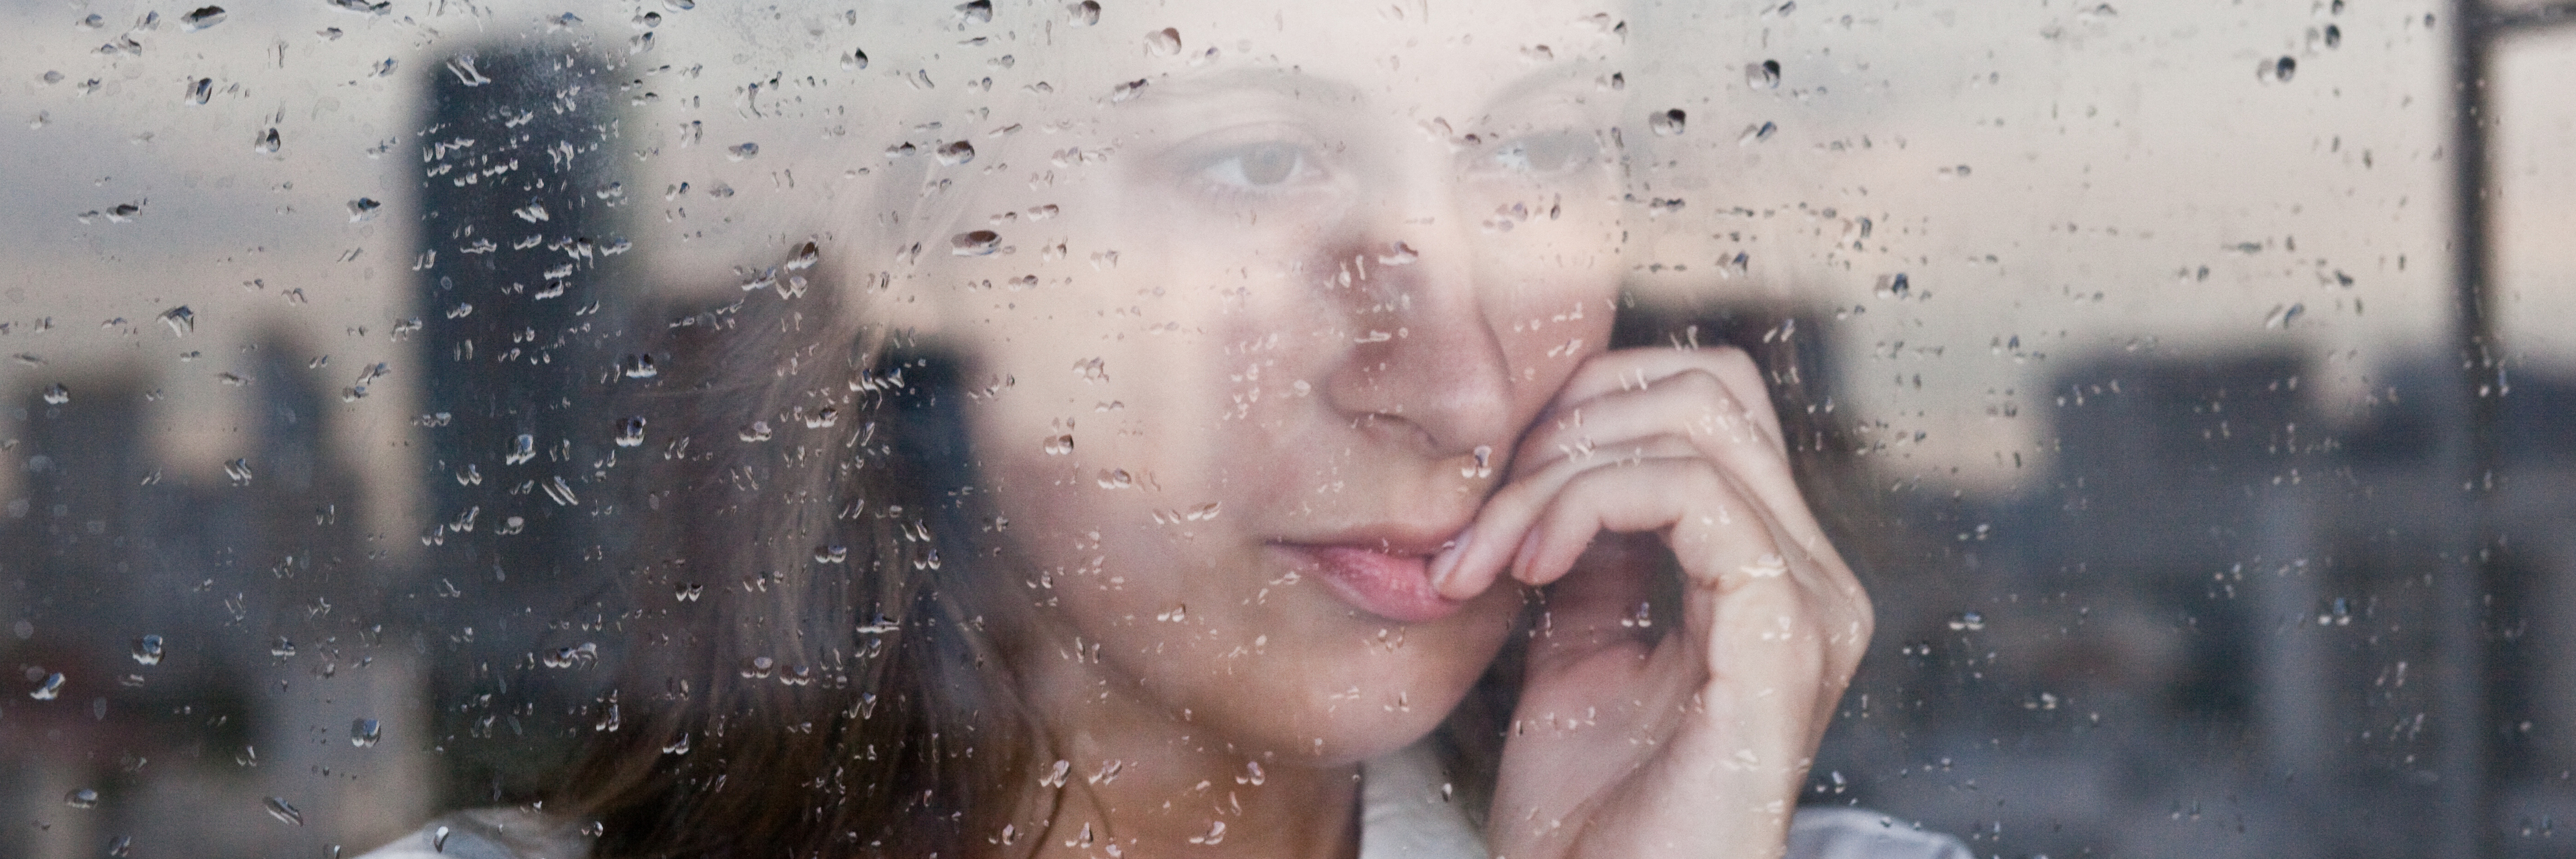 anxious woman looking out of window biting nails